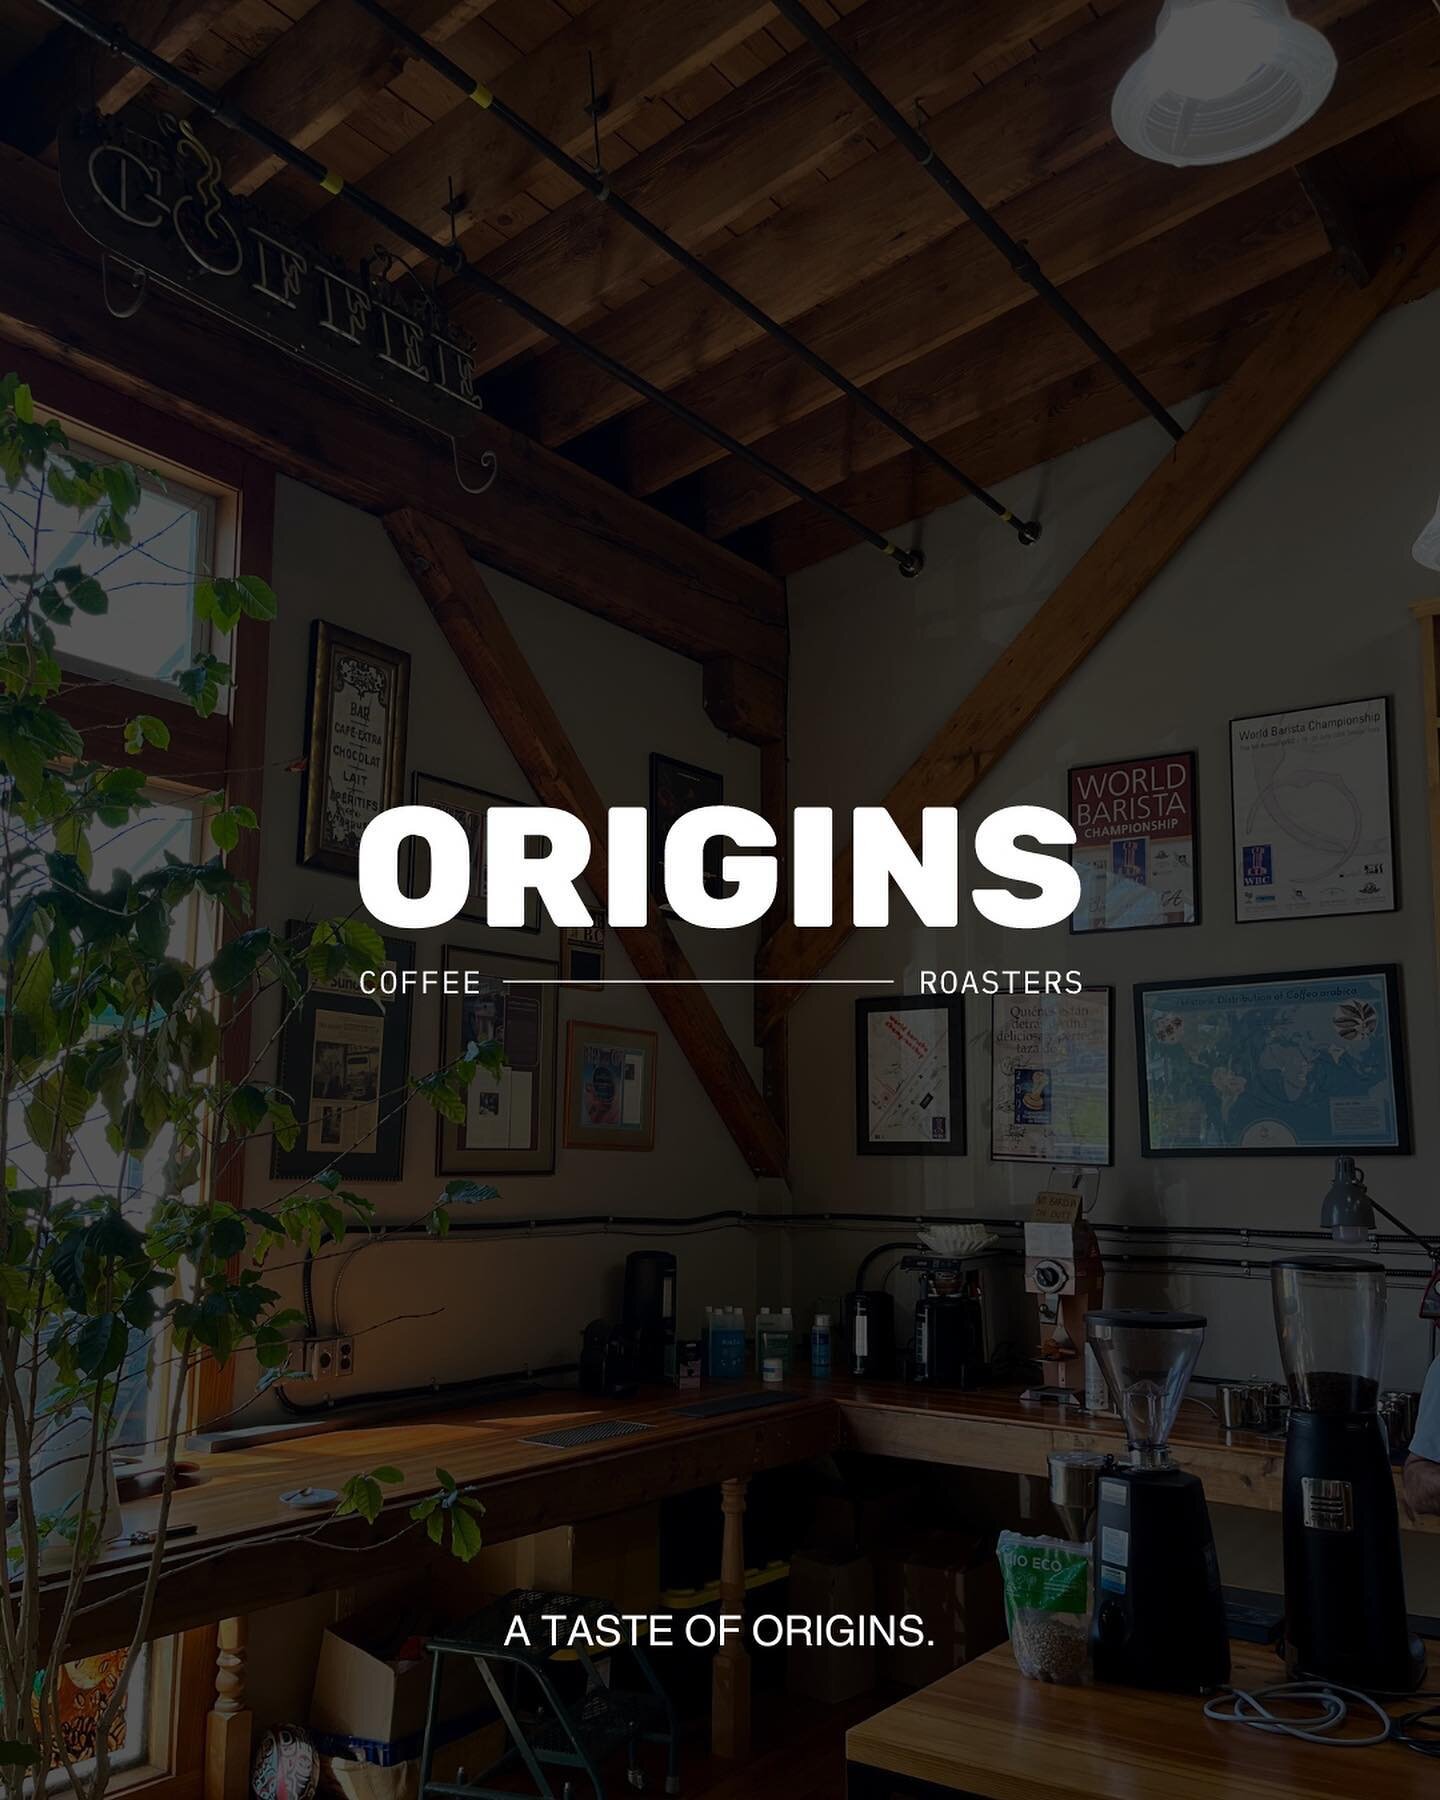 Welcome to the world of Origins. A legacy of uncompromising quality. ⁠
⁠
Your exceptional coffee experience starts now. Visit us in store for free tastings on Friday and Saturday between 11am - 4pm or order online through the link in bio. ⁠
⁠
#Origin